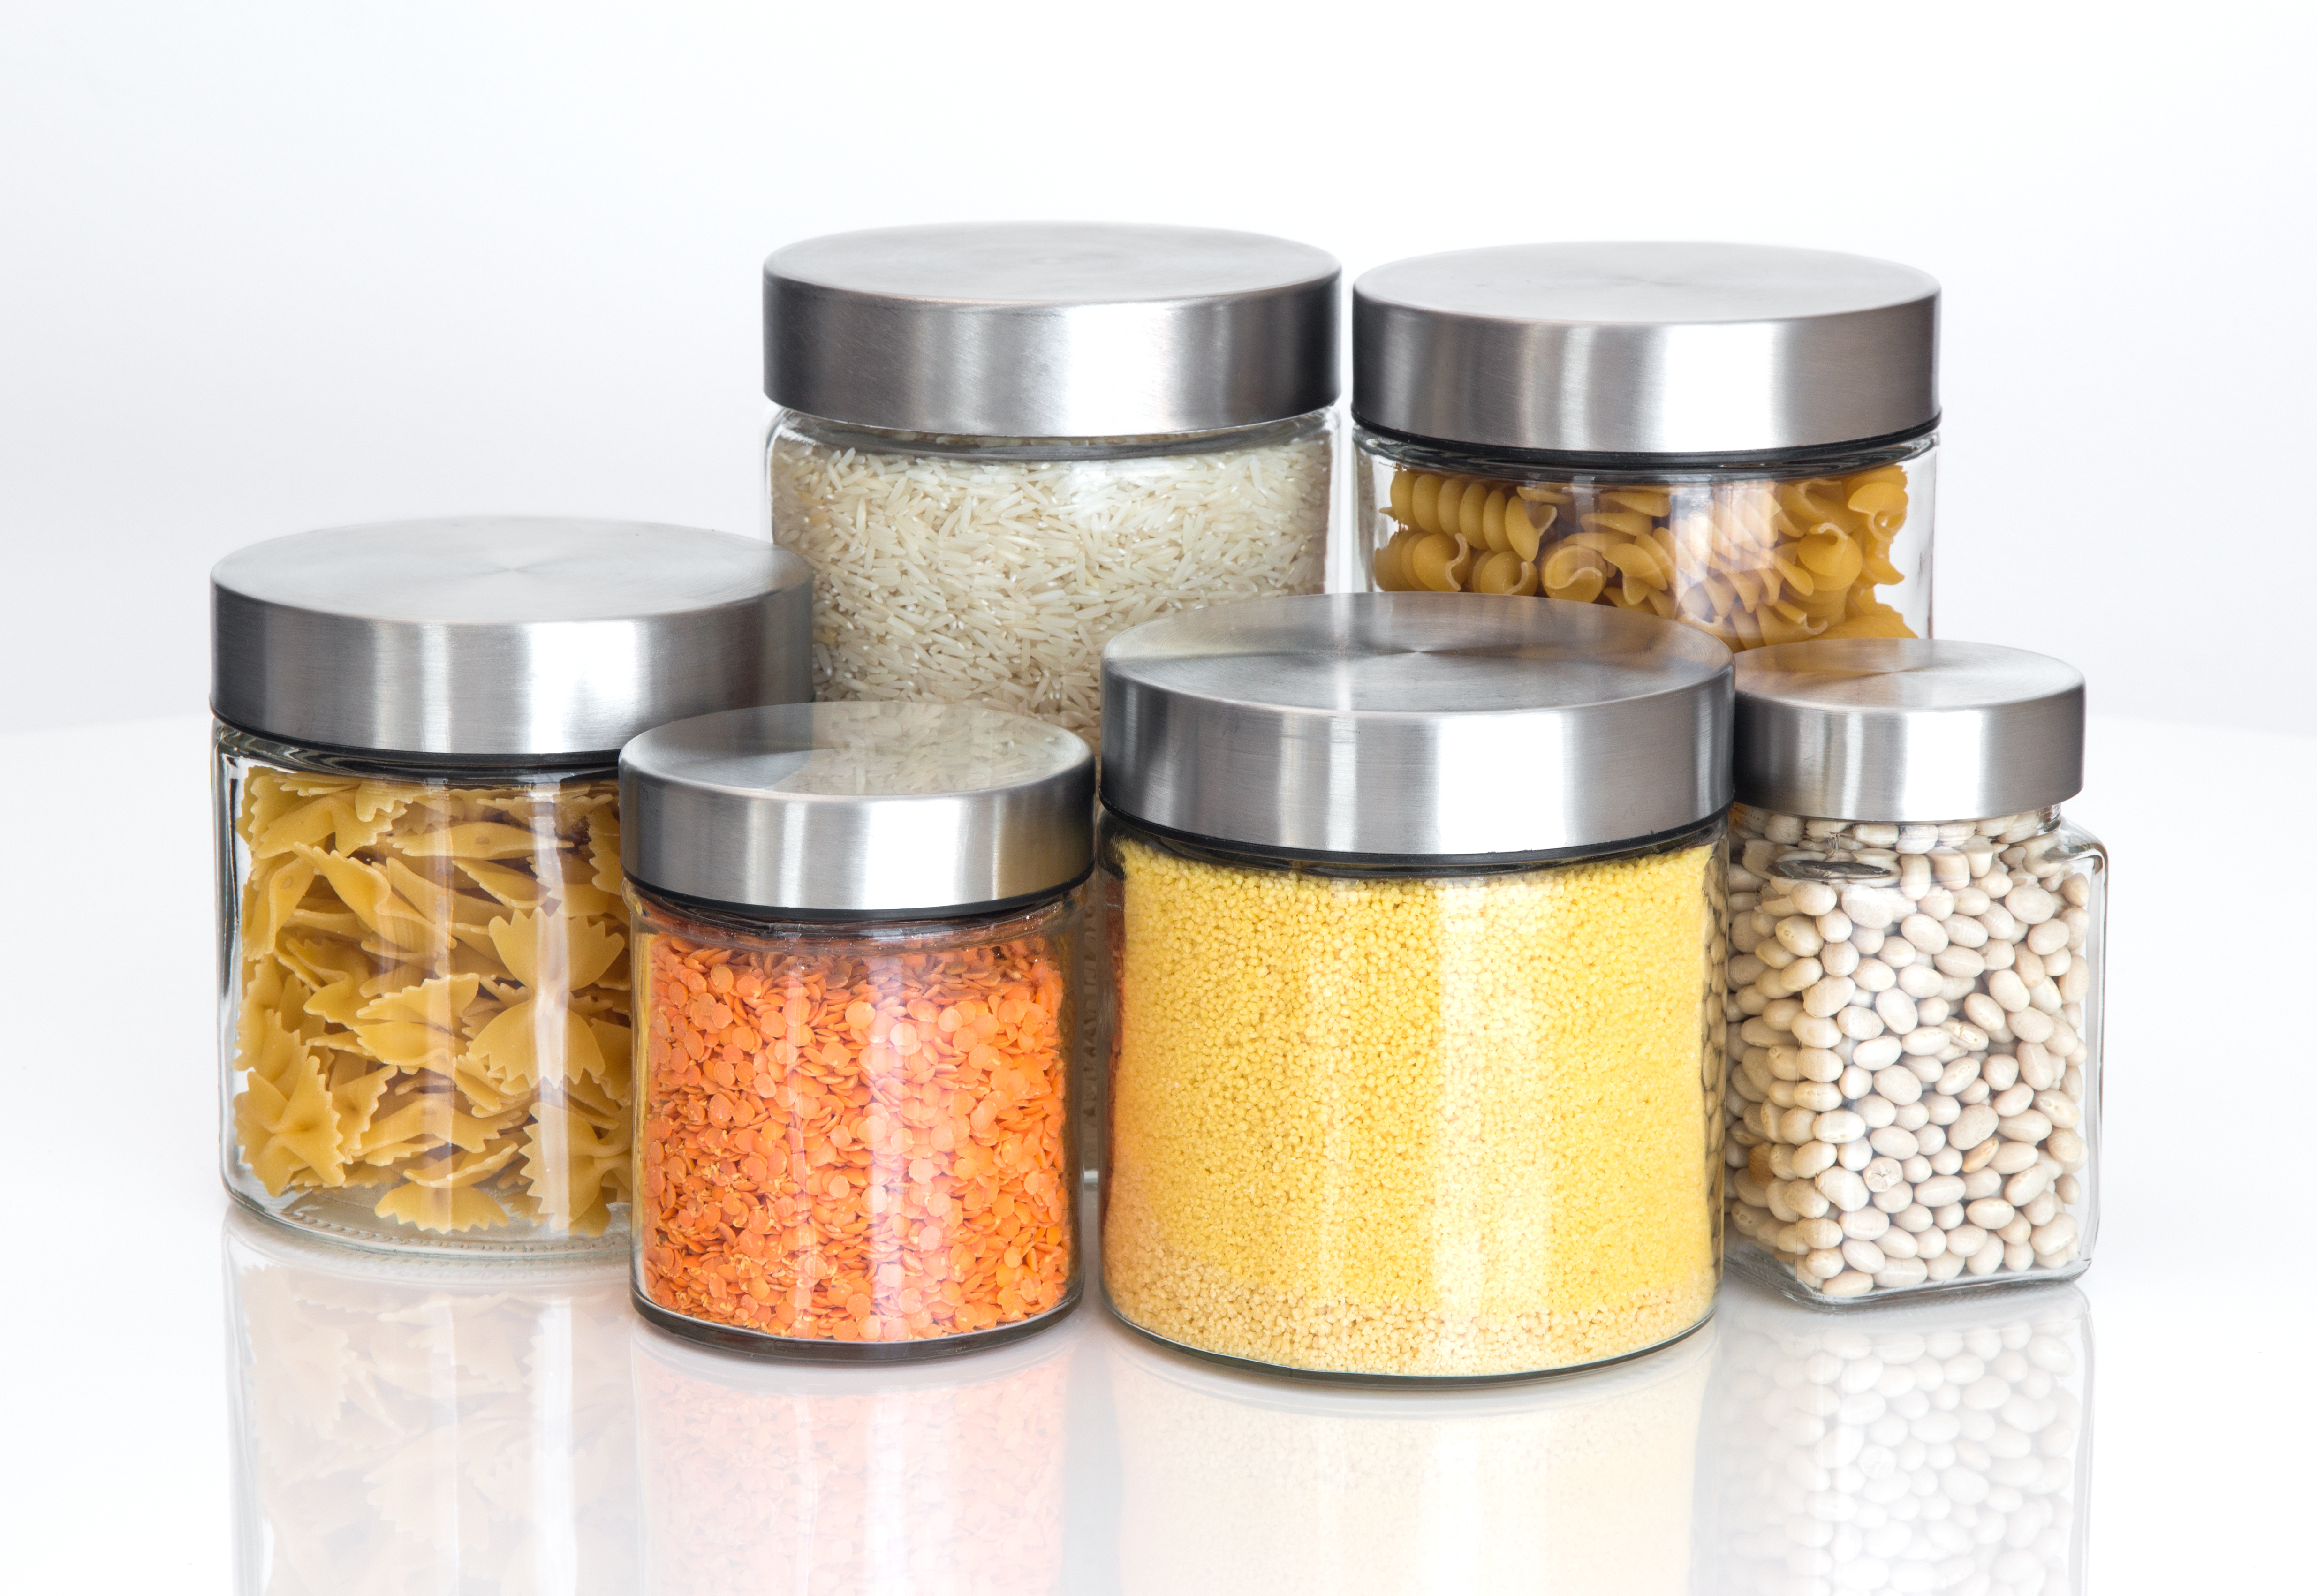 Six jars containing various dry goods such as lentils, beans, and pasta.